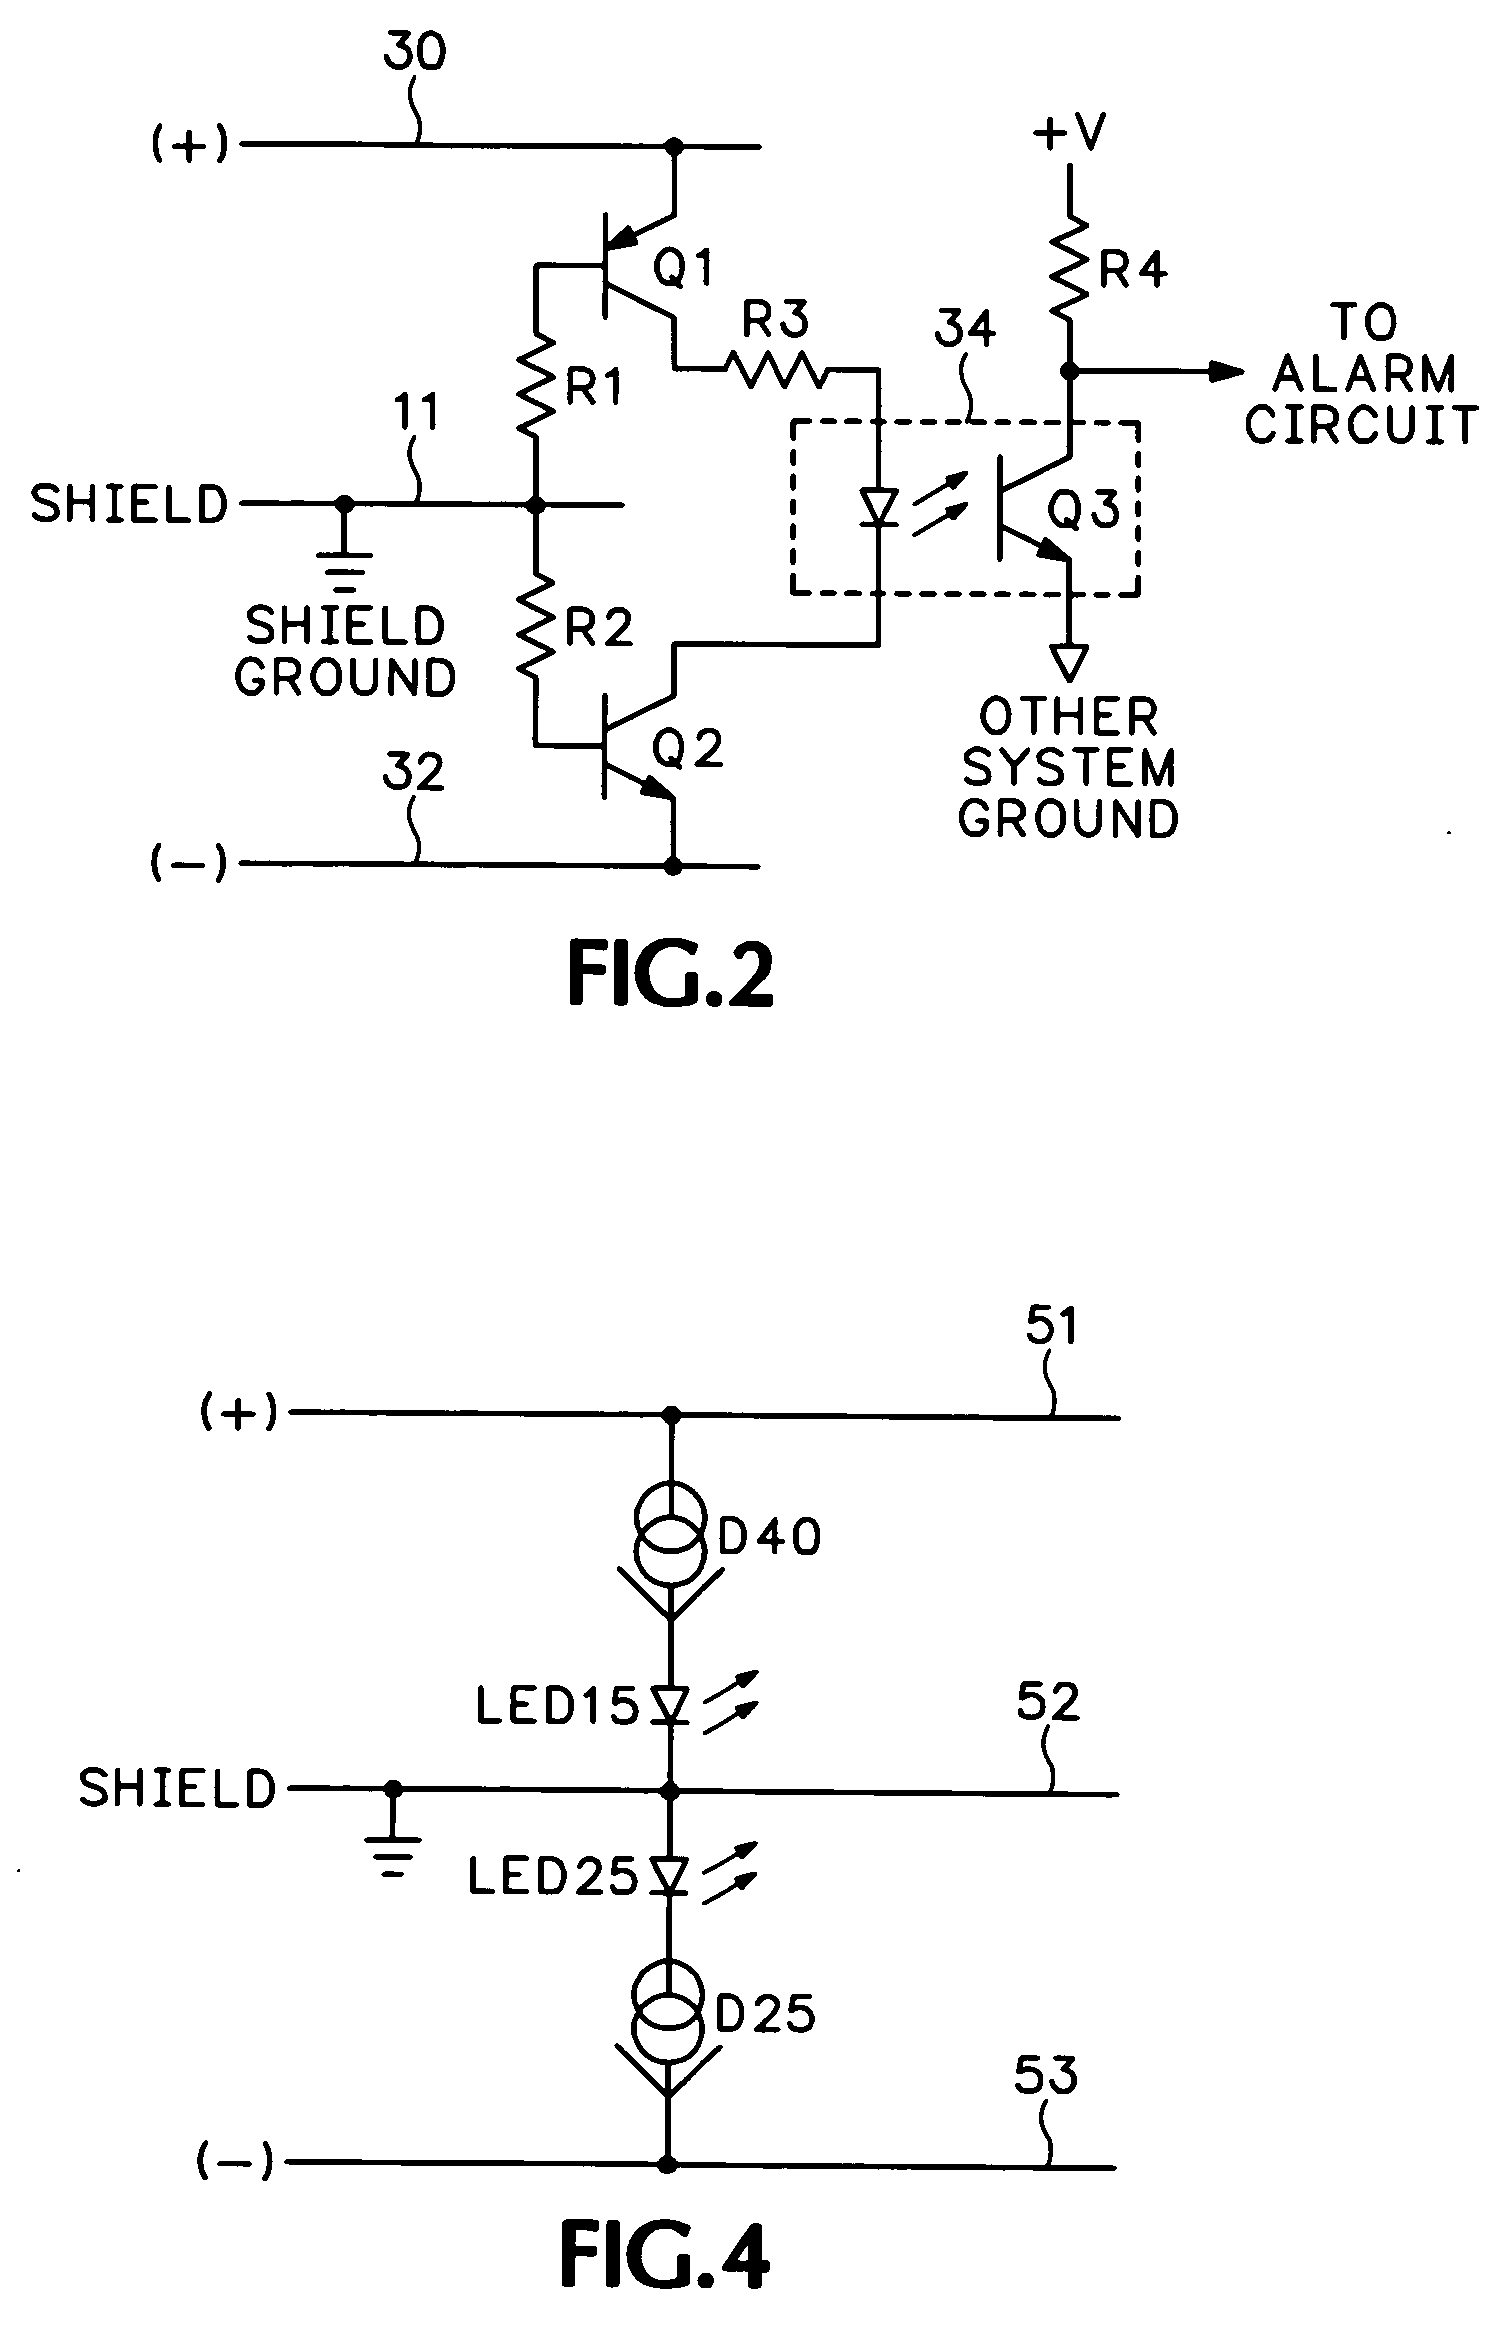 Short circuit detector for shield conductor in a fieldbus network